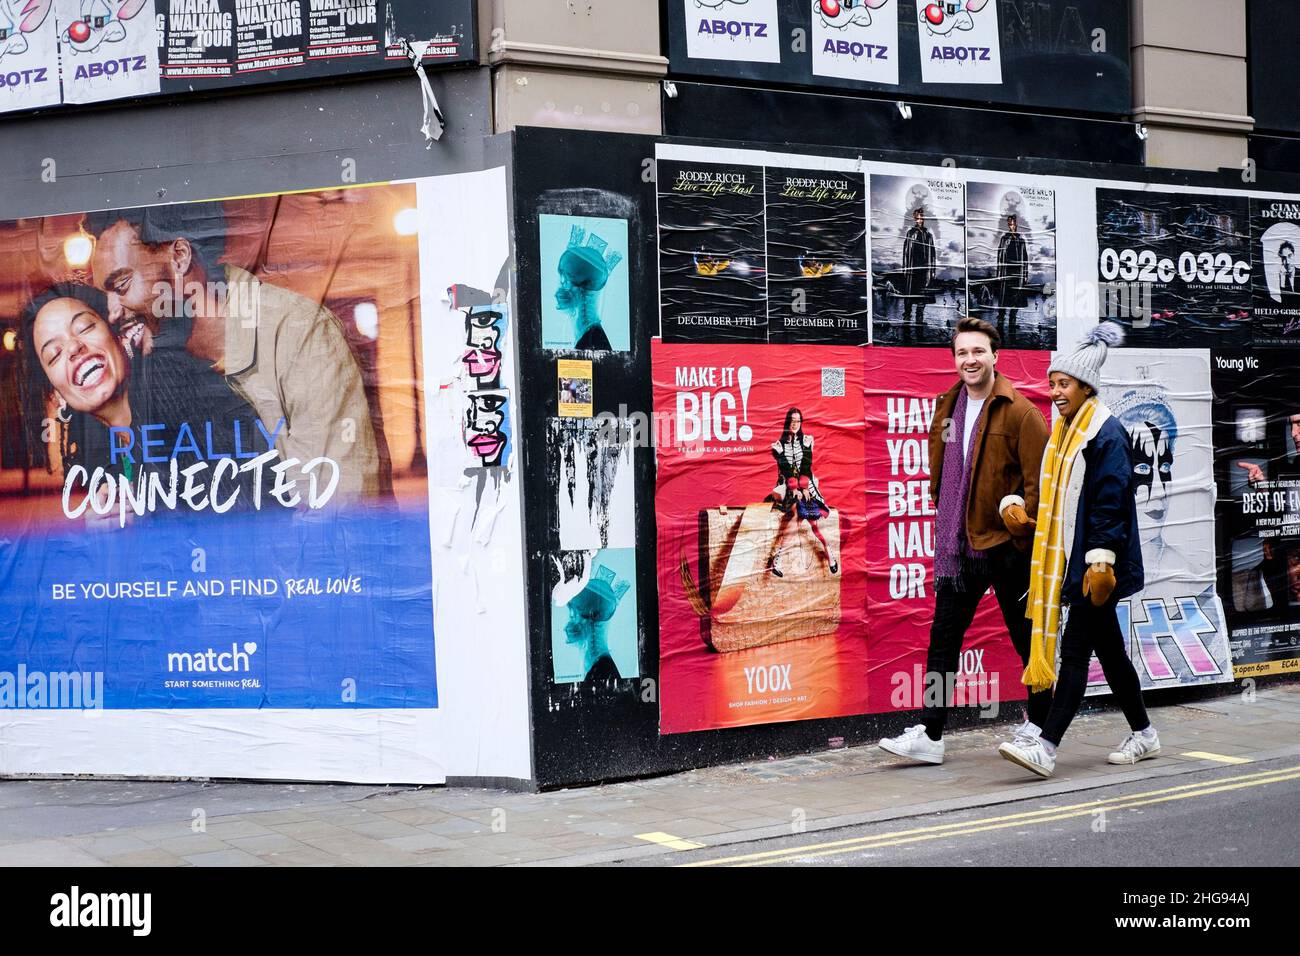 Smiling, young couple walk past wall covered with fly posters, one advertising a dating website. London, UK. Stock Photo